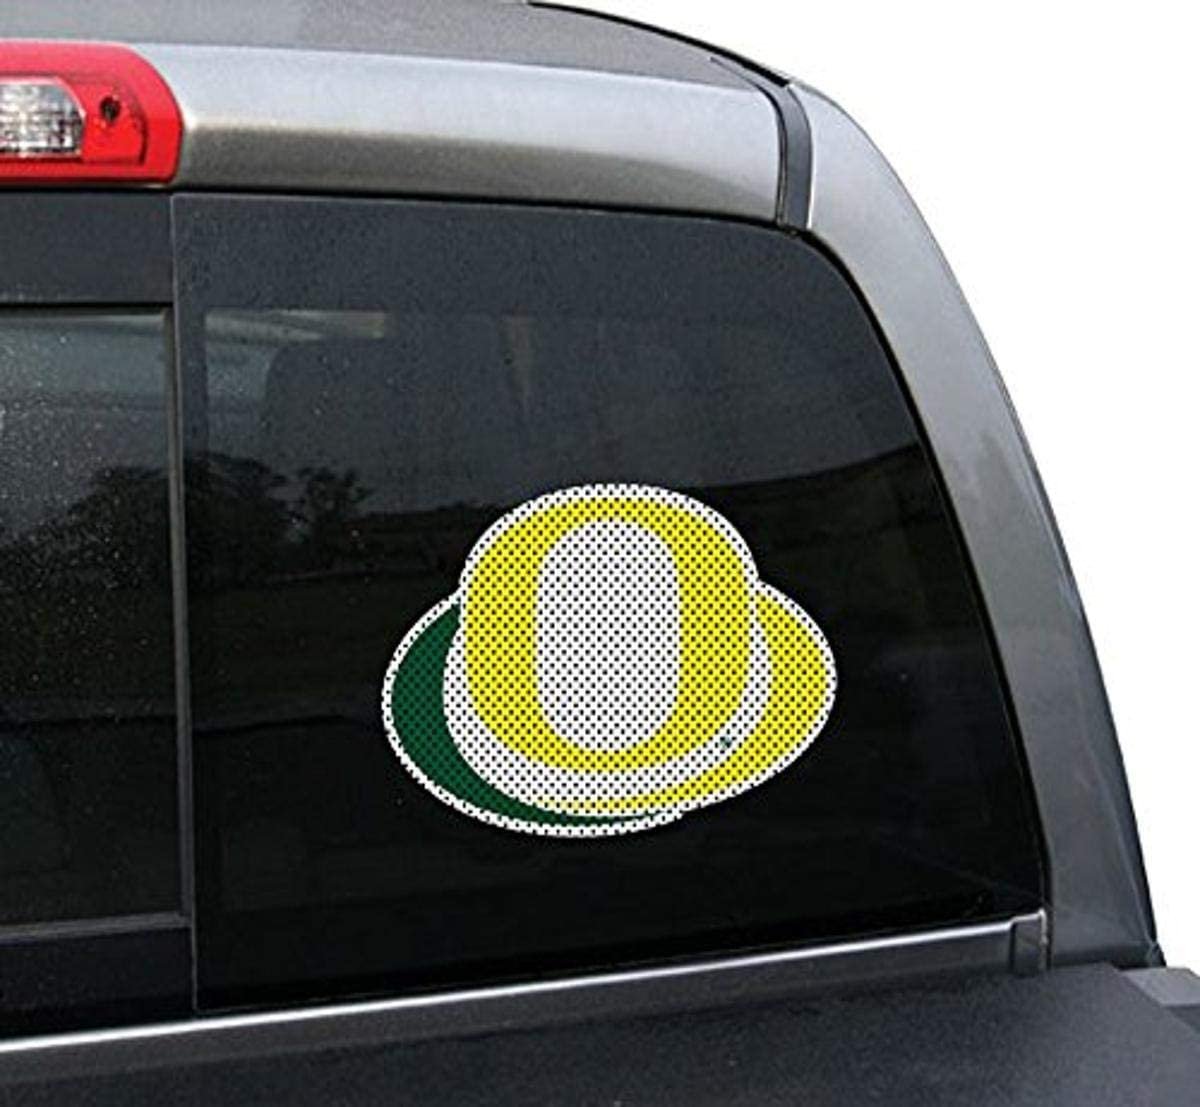 University of Oregon Ducks 8 Inch Preforated Window Film Decal Sticker, One-Way Vision, Adhesive Backing